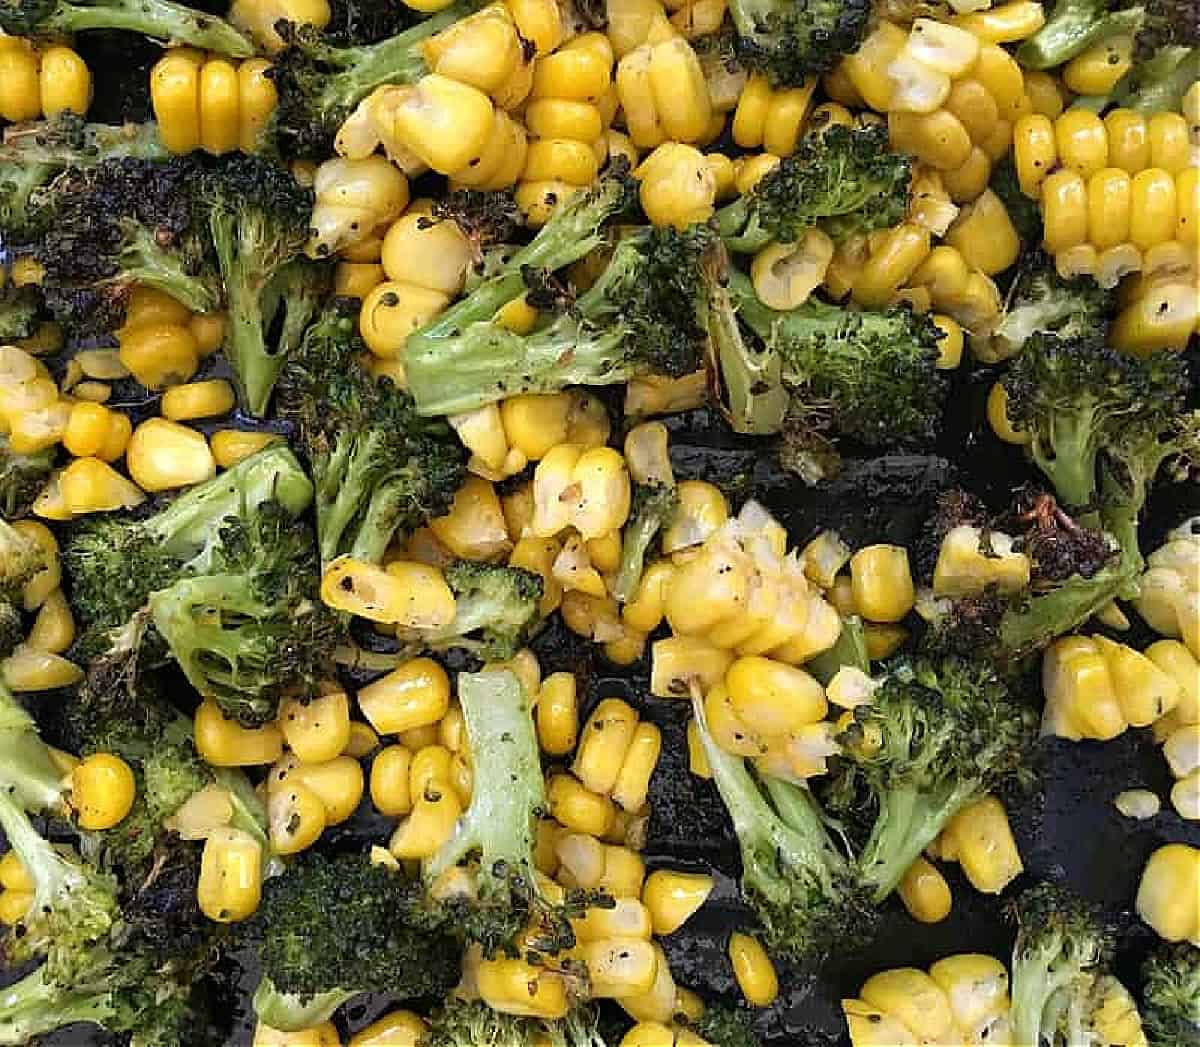 Roasted corn and broccoli pieces on a black tray.